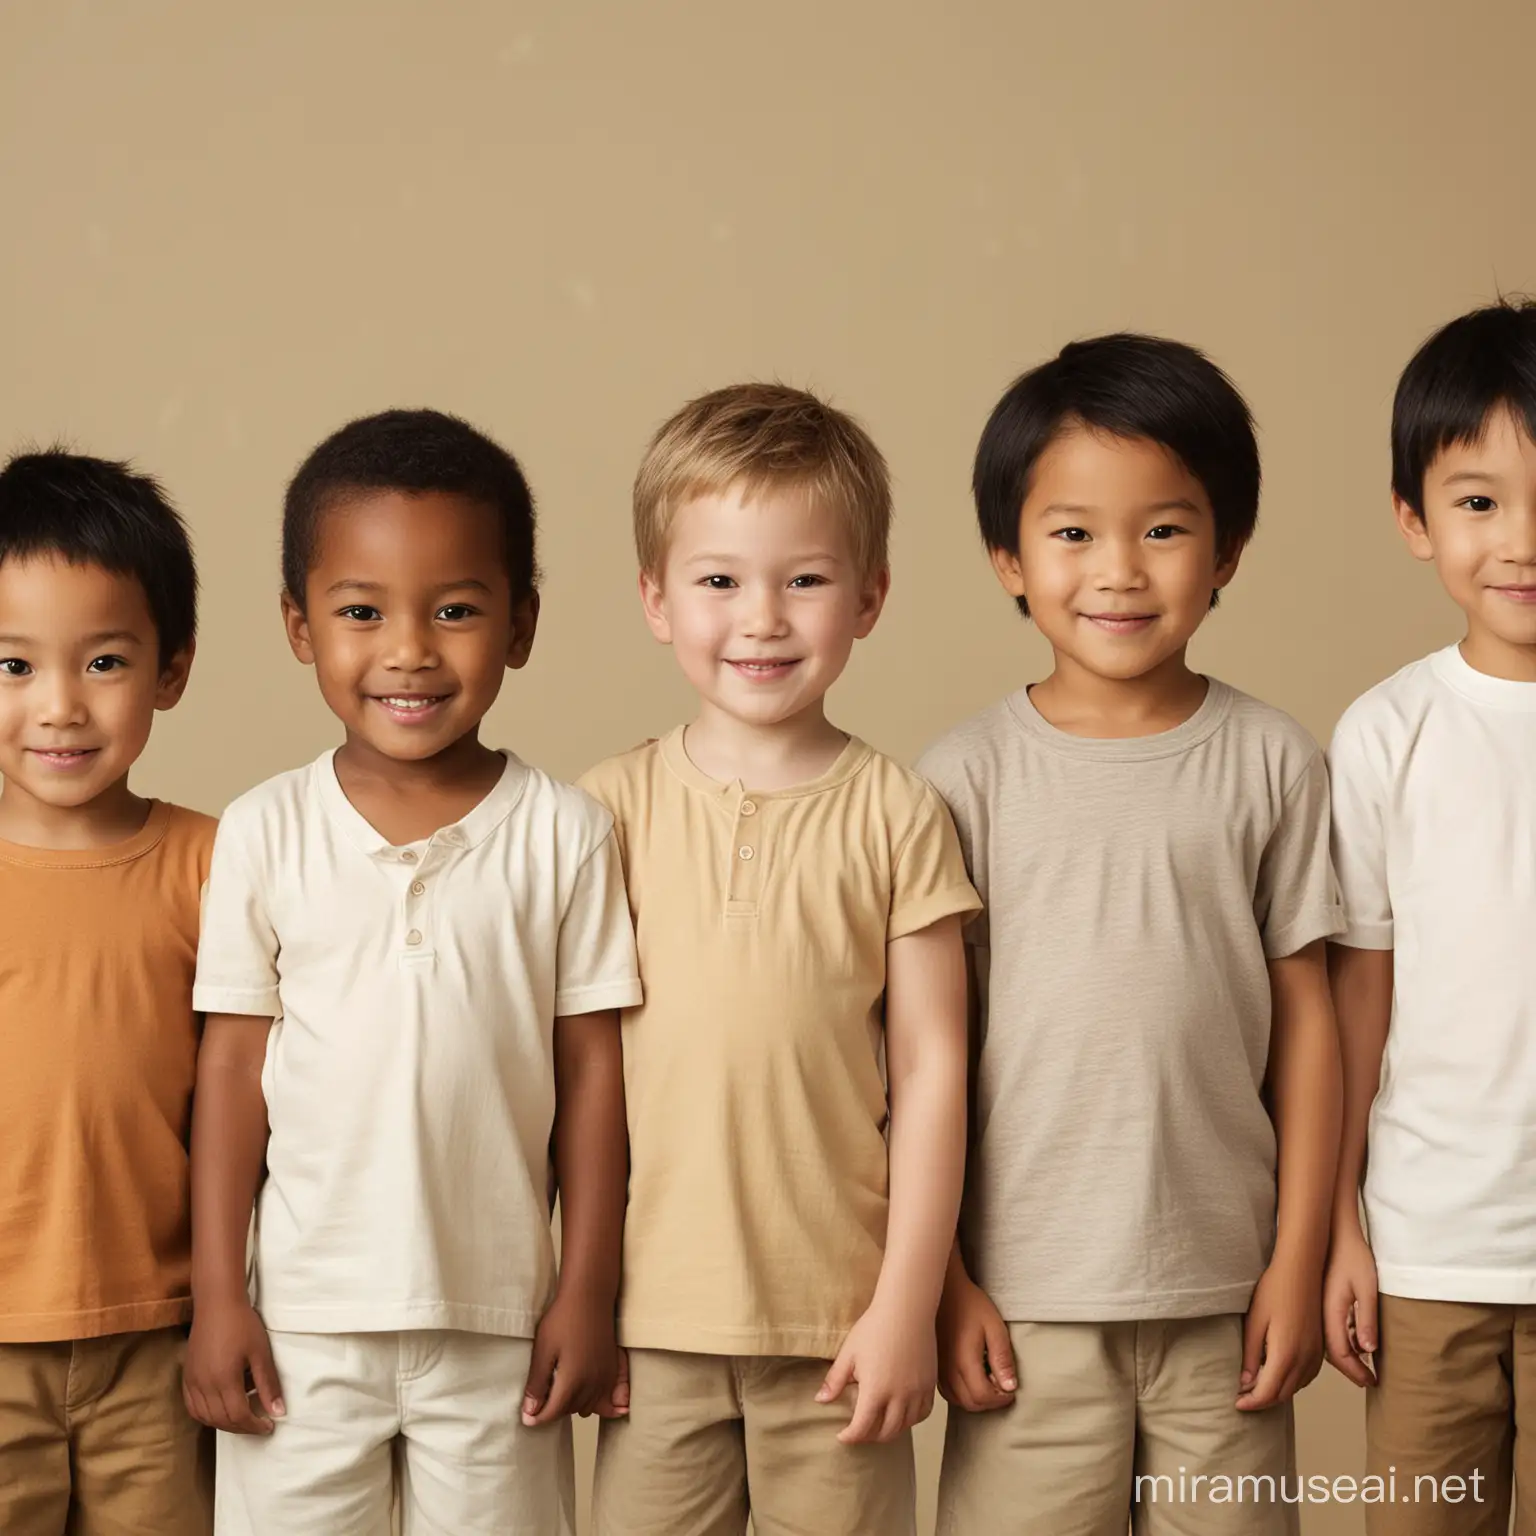 a row of children: one black child, one white child, one Asian child and one brown child